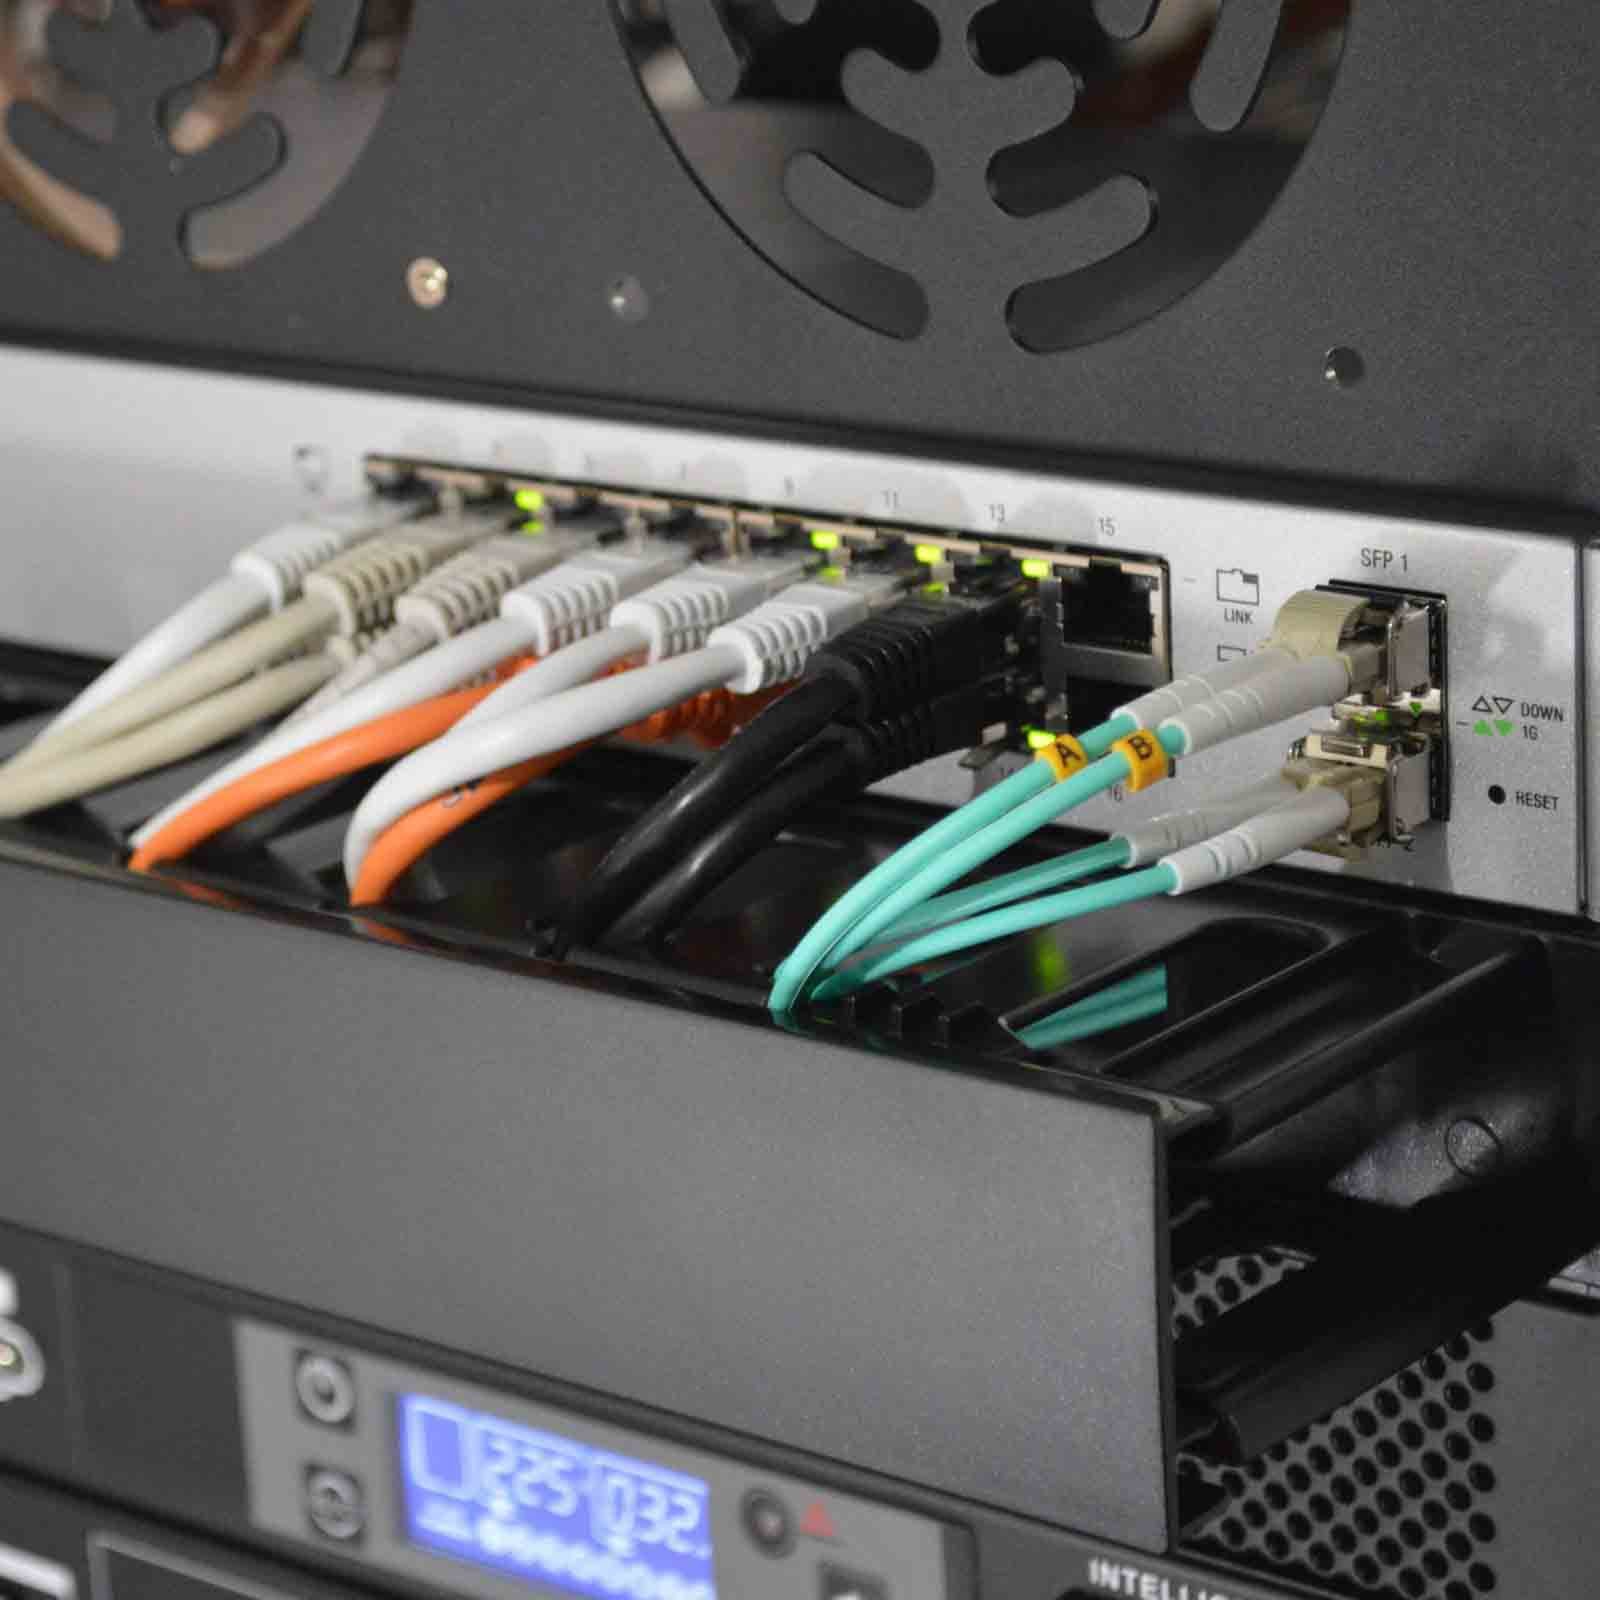 Networking: Image of internet server sharing Internet with lan cables